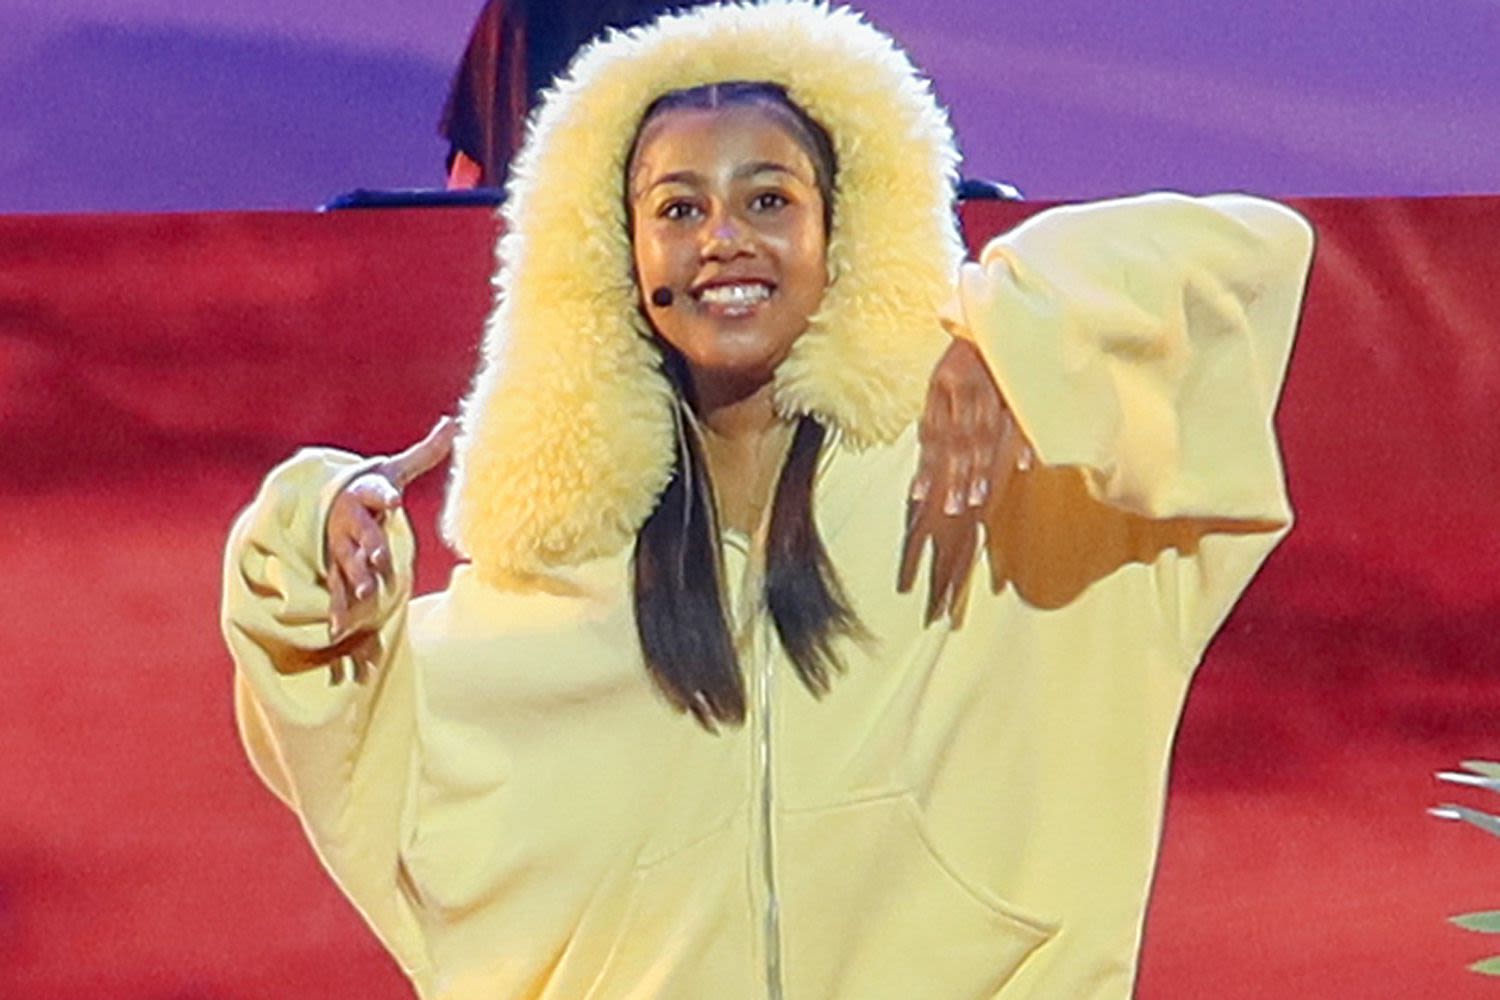 North West Performs ‘I Just Can’t Wait to Be King’ as Young Simba During “The Lion King” Live Concert